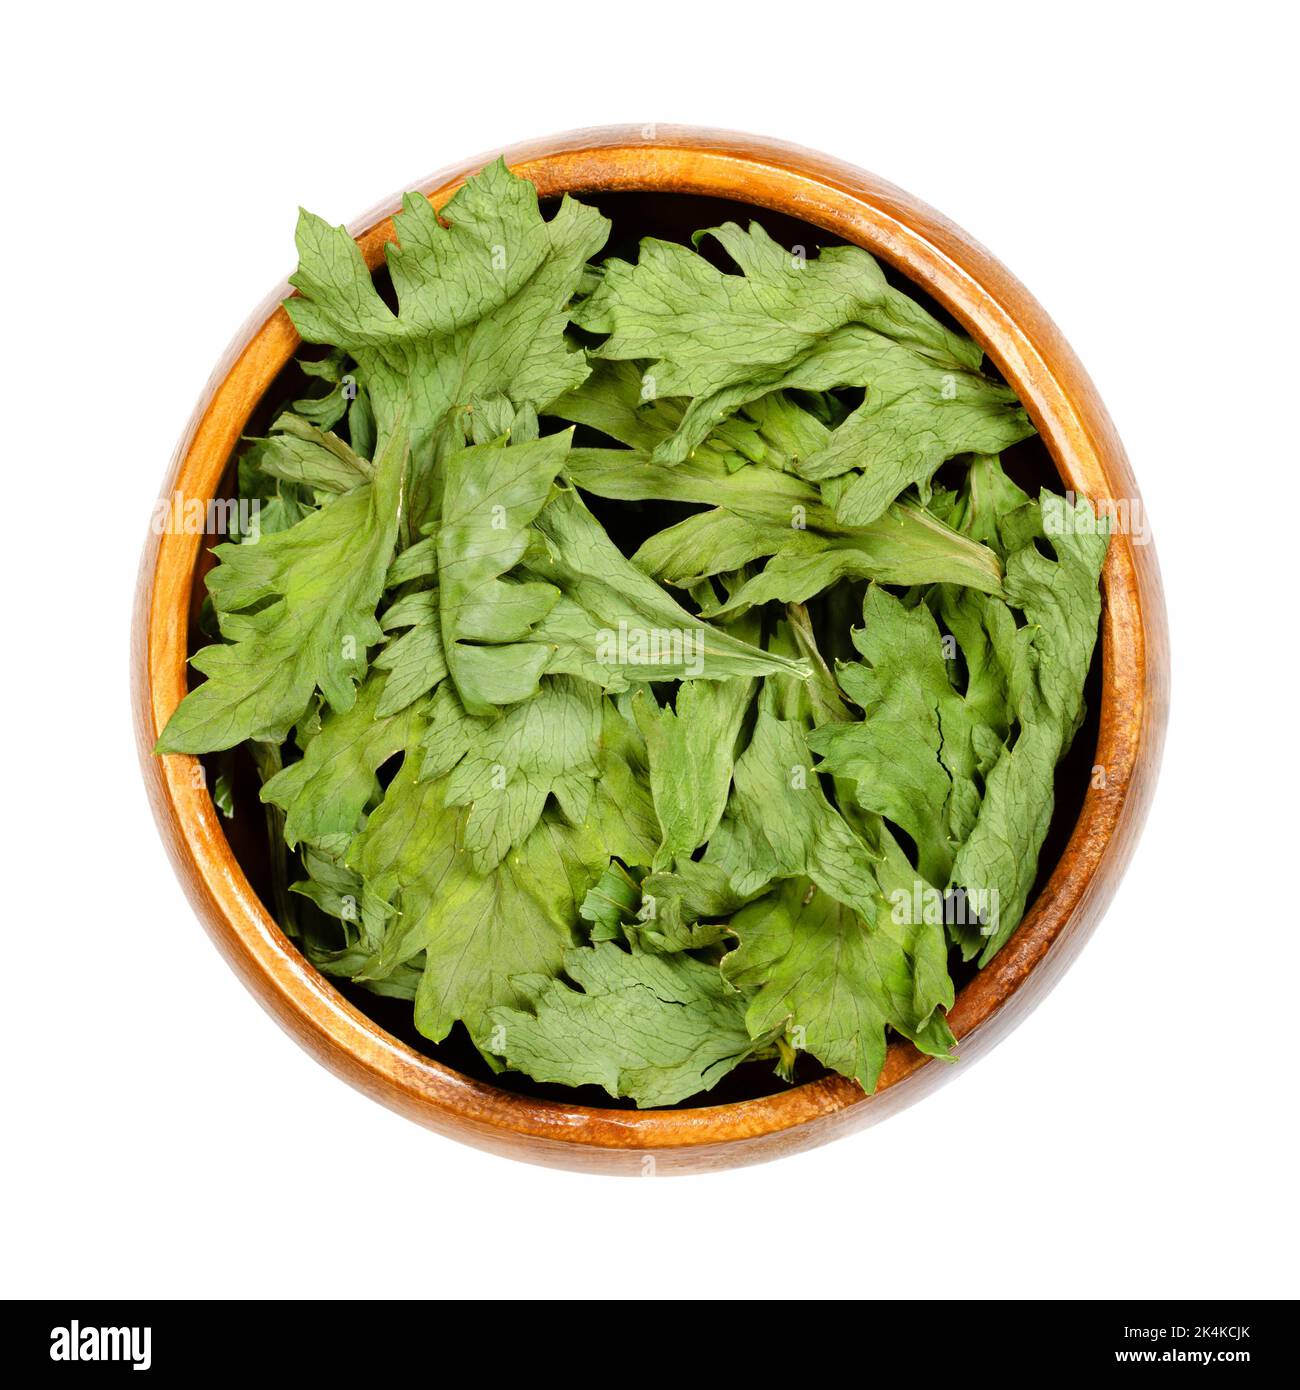 Celery, dehydrated green leaves, in a wooden bowl. Apium graveolens var. graveolens, root vegetable, primarily grown for its stalk. Stock Photo